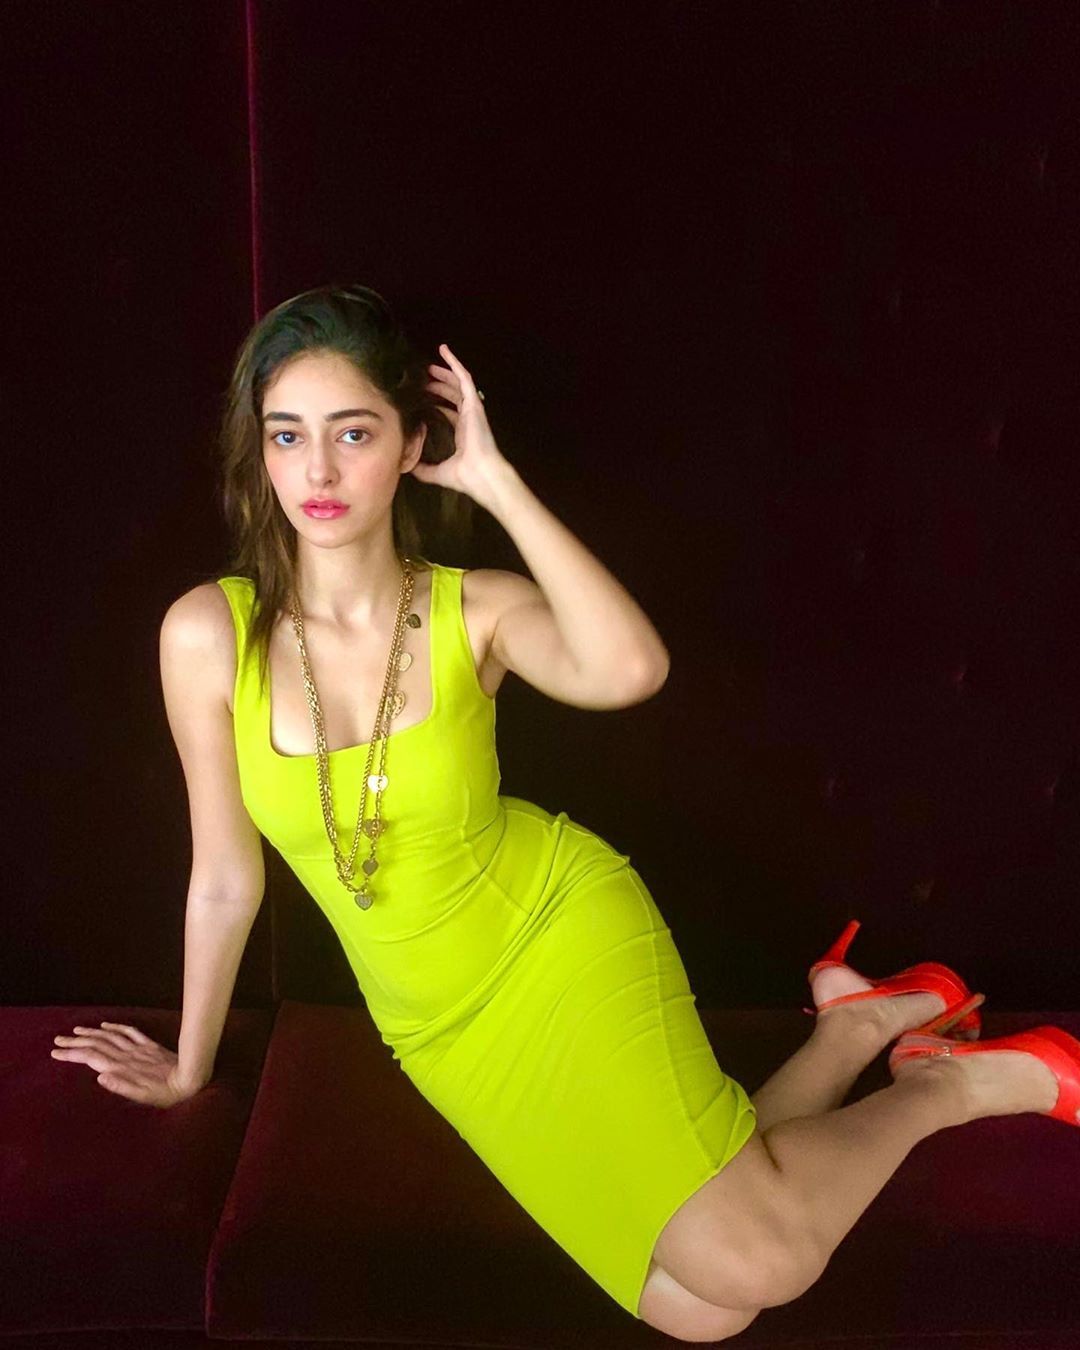 IN PICS: Ananya Panday's Hottest Looks In Bodycon Outfits 3